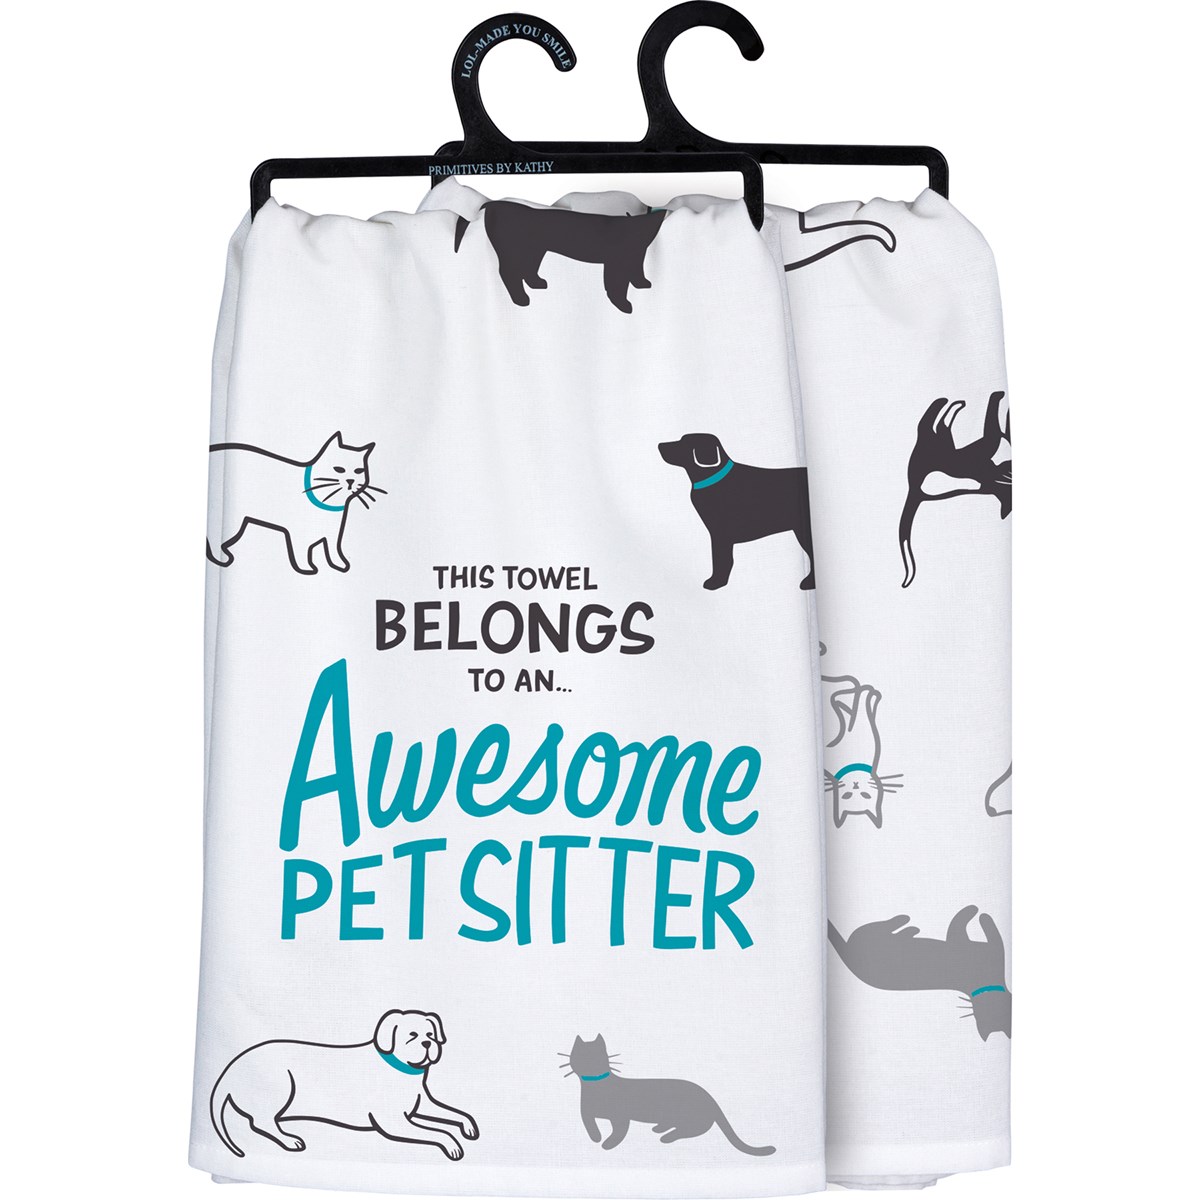 Awesome Pet Sitter Kitchen Towel - Cotton